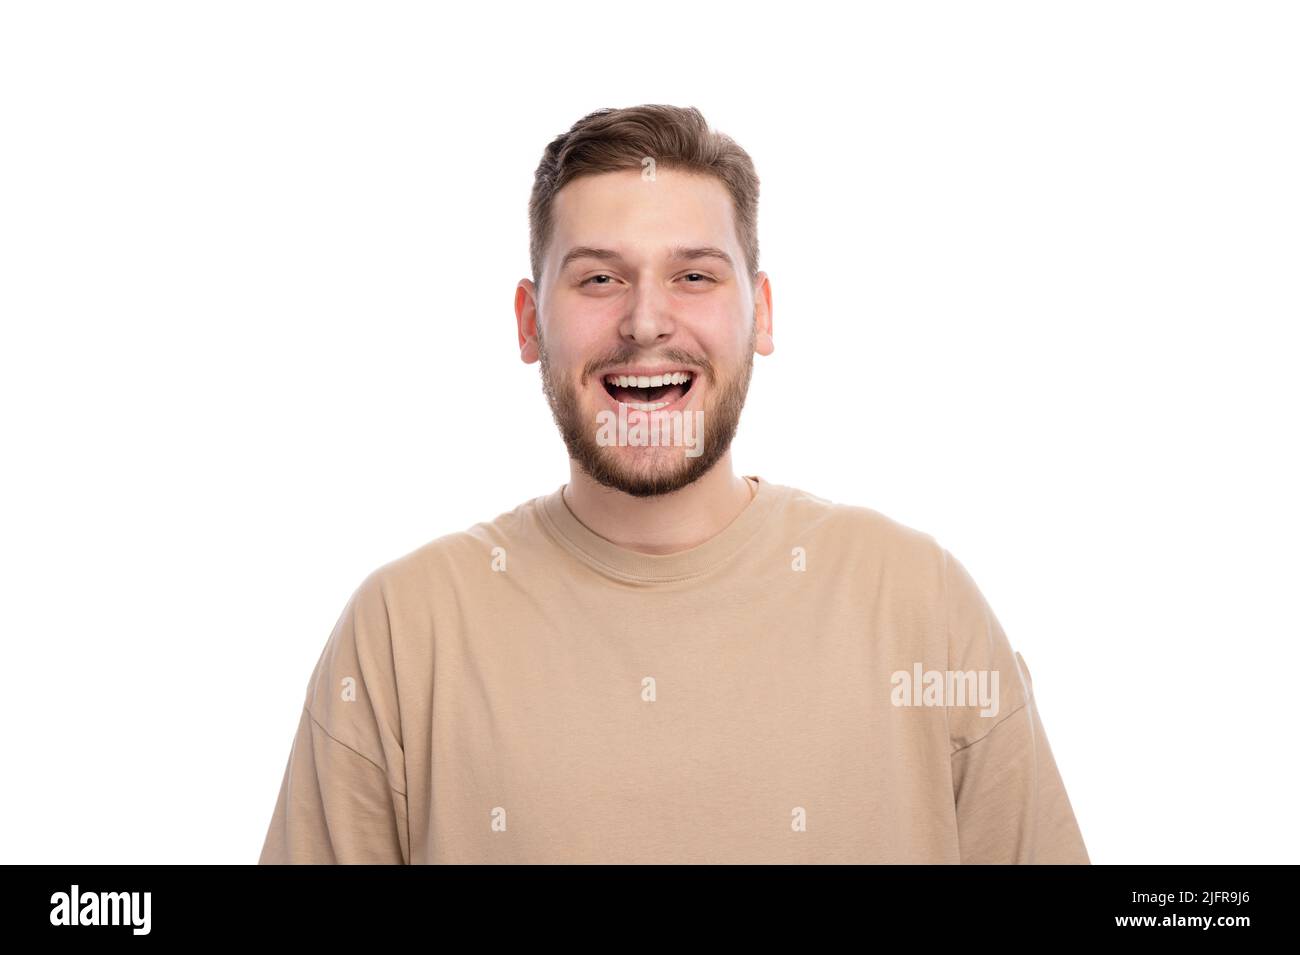 Portrait of cheerful young man Stock Photo